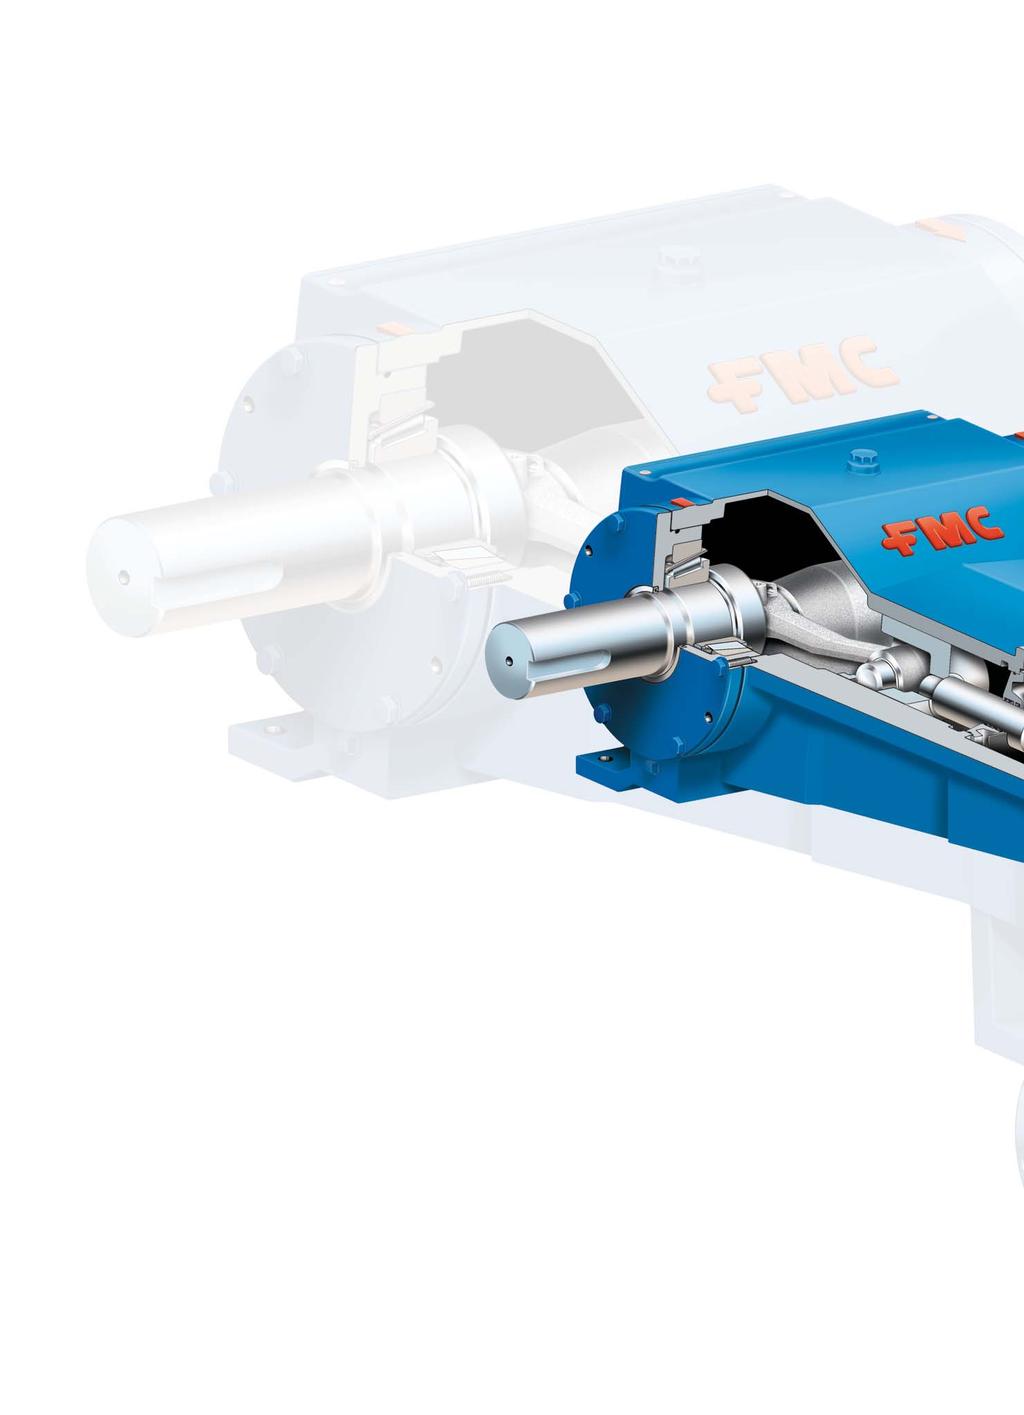 Pumps FMC Technologies Pumps are an excellent choice for the most demanding applications.